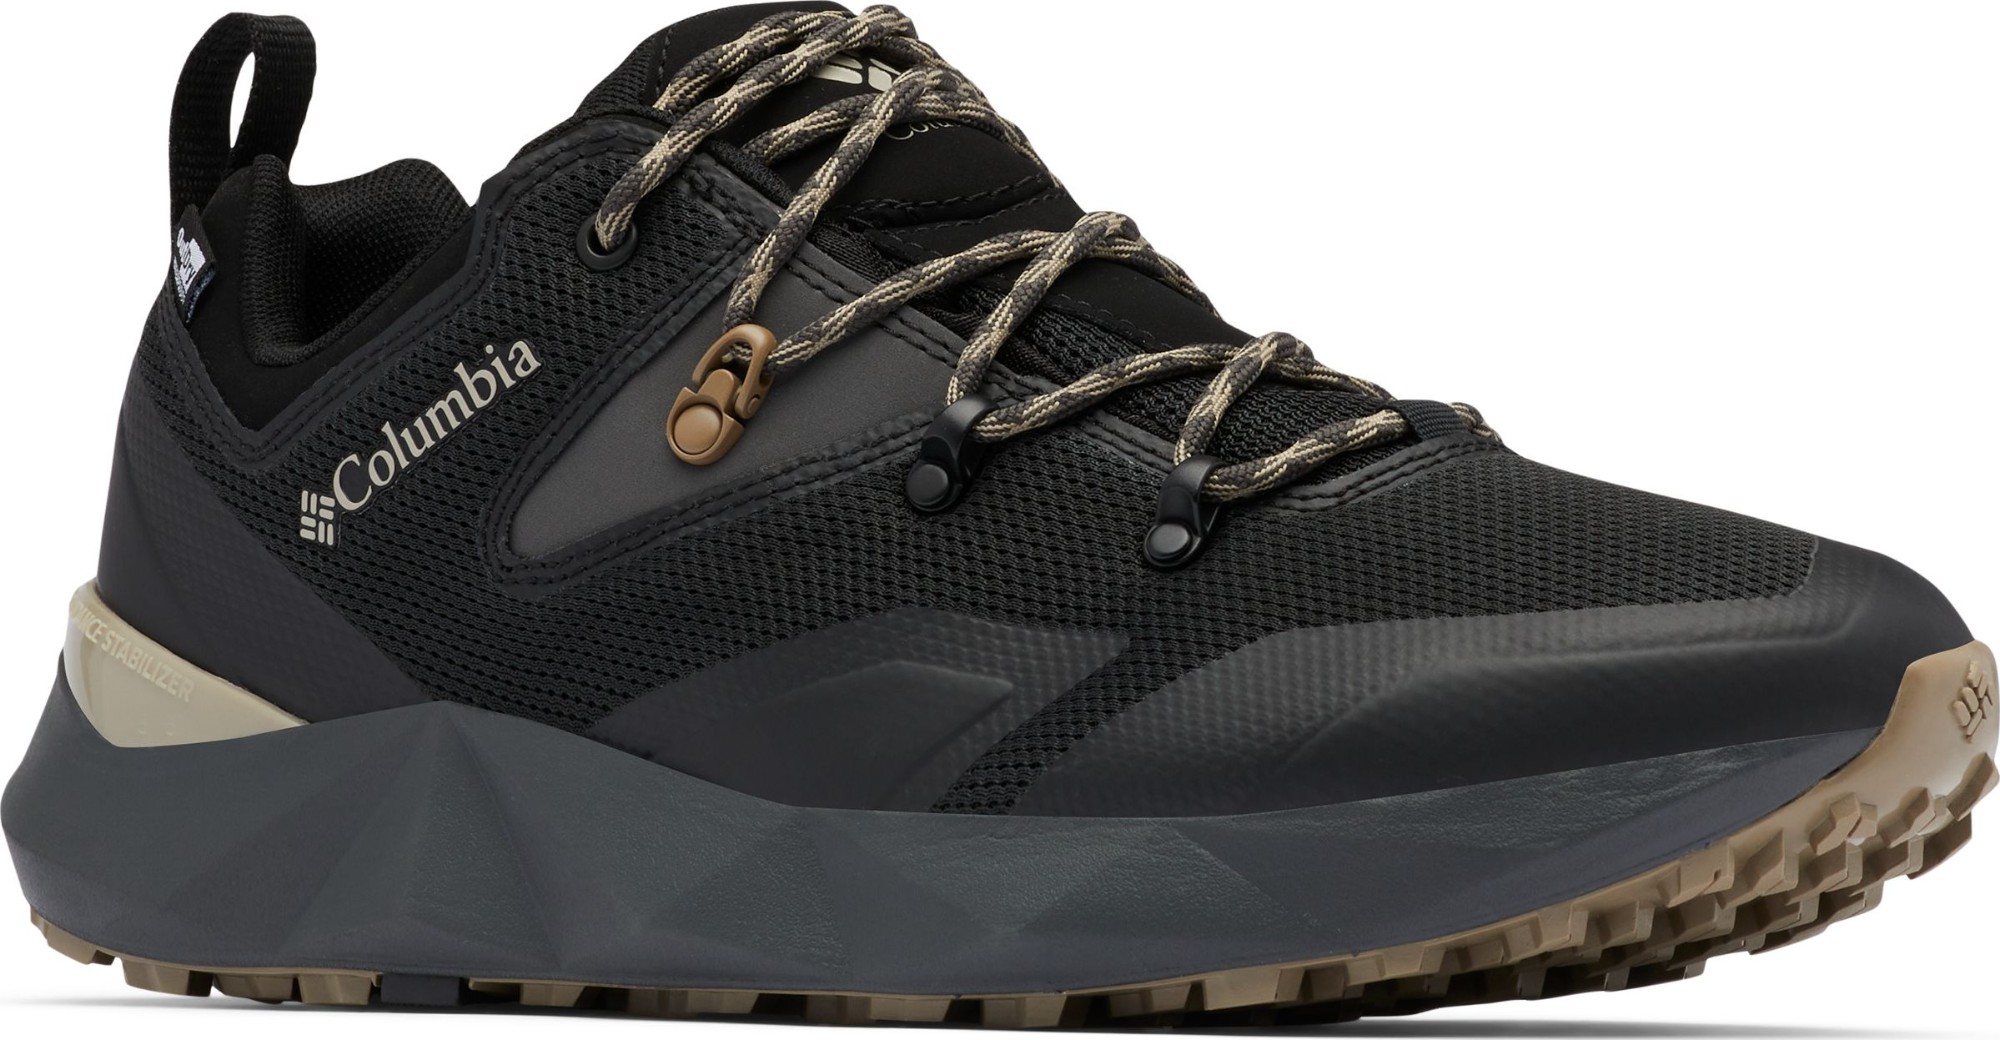 Columbia Facet 60 Low Outdry Black/Ancient Fossil 44